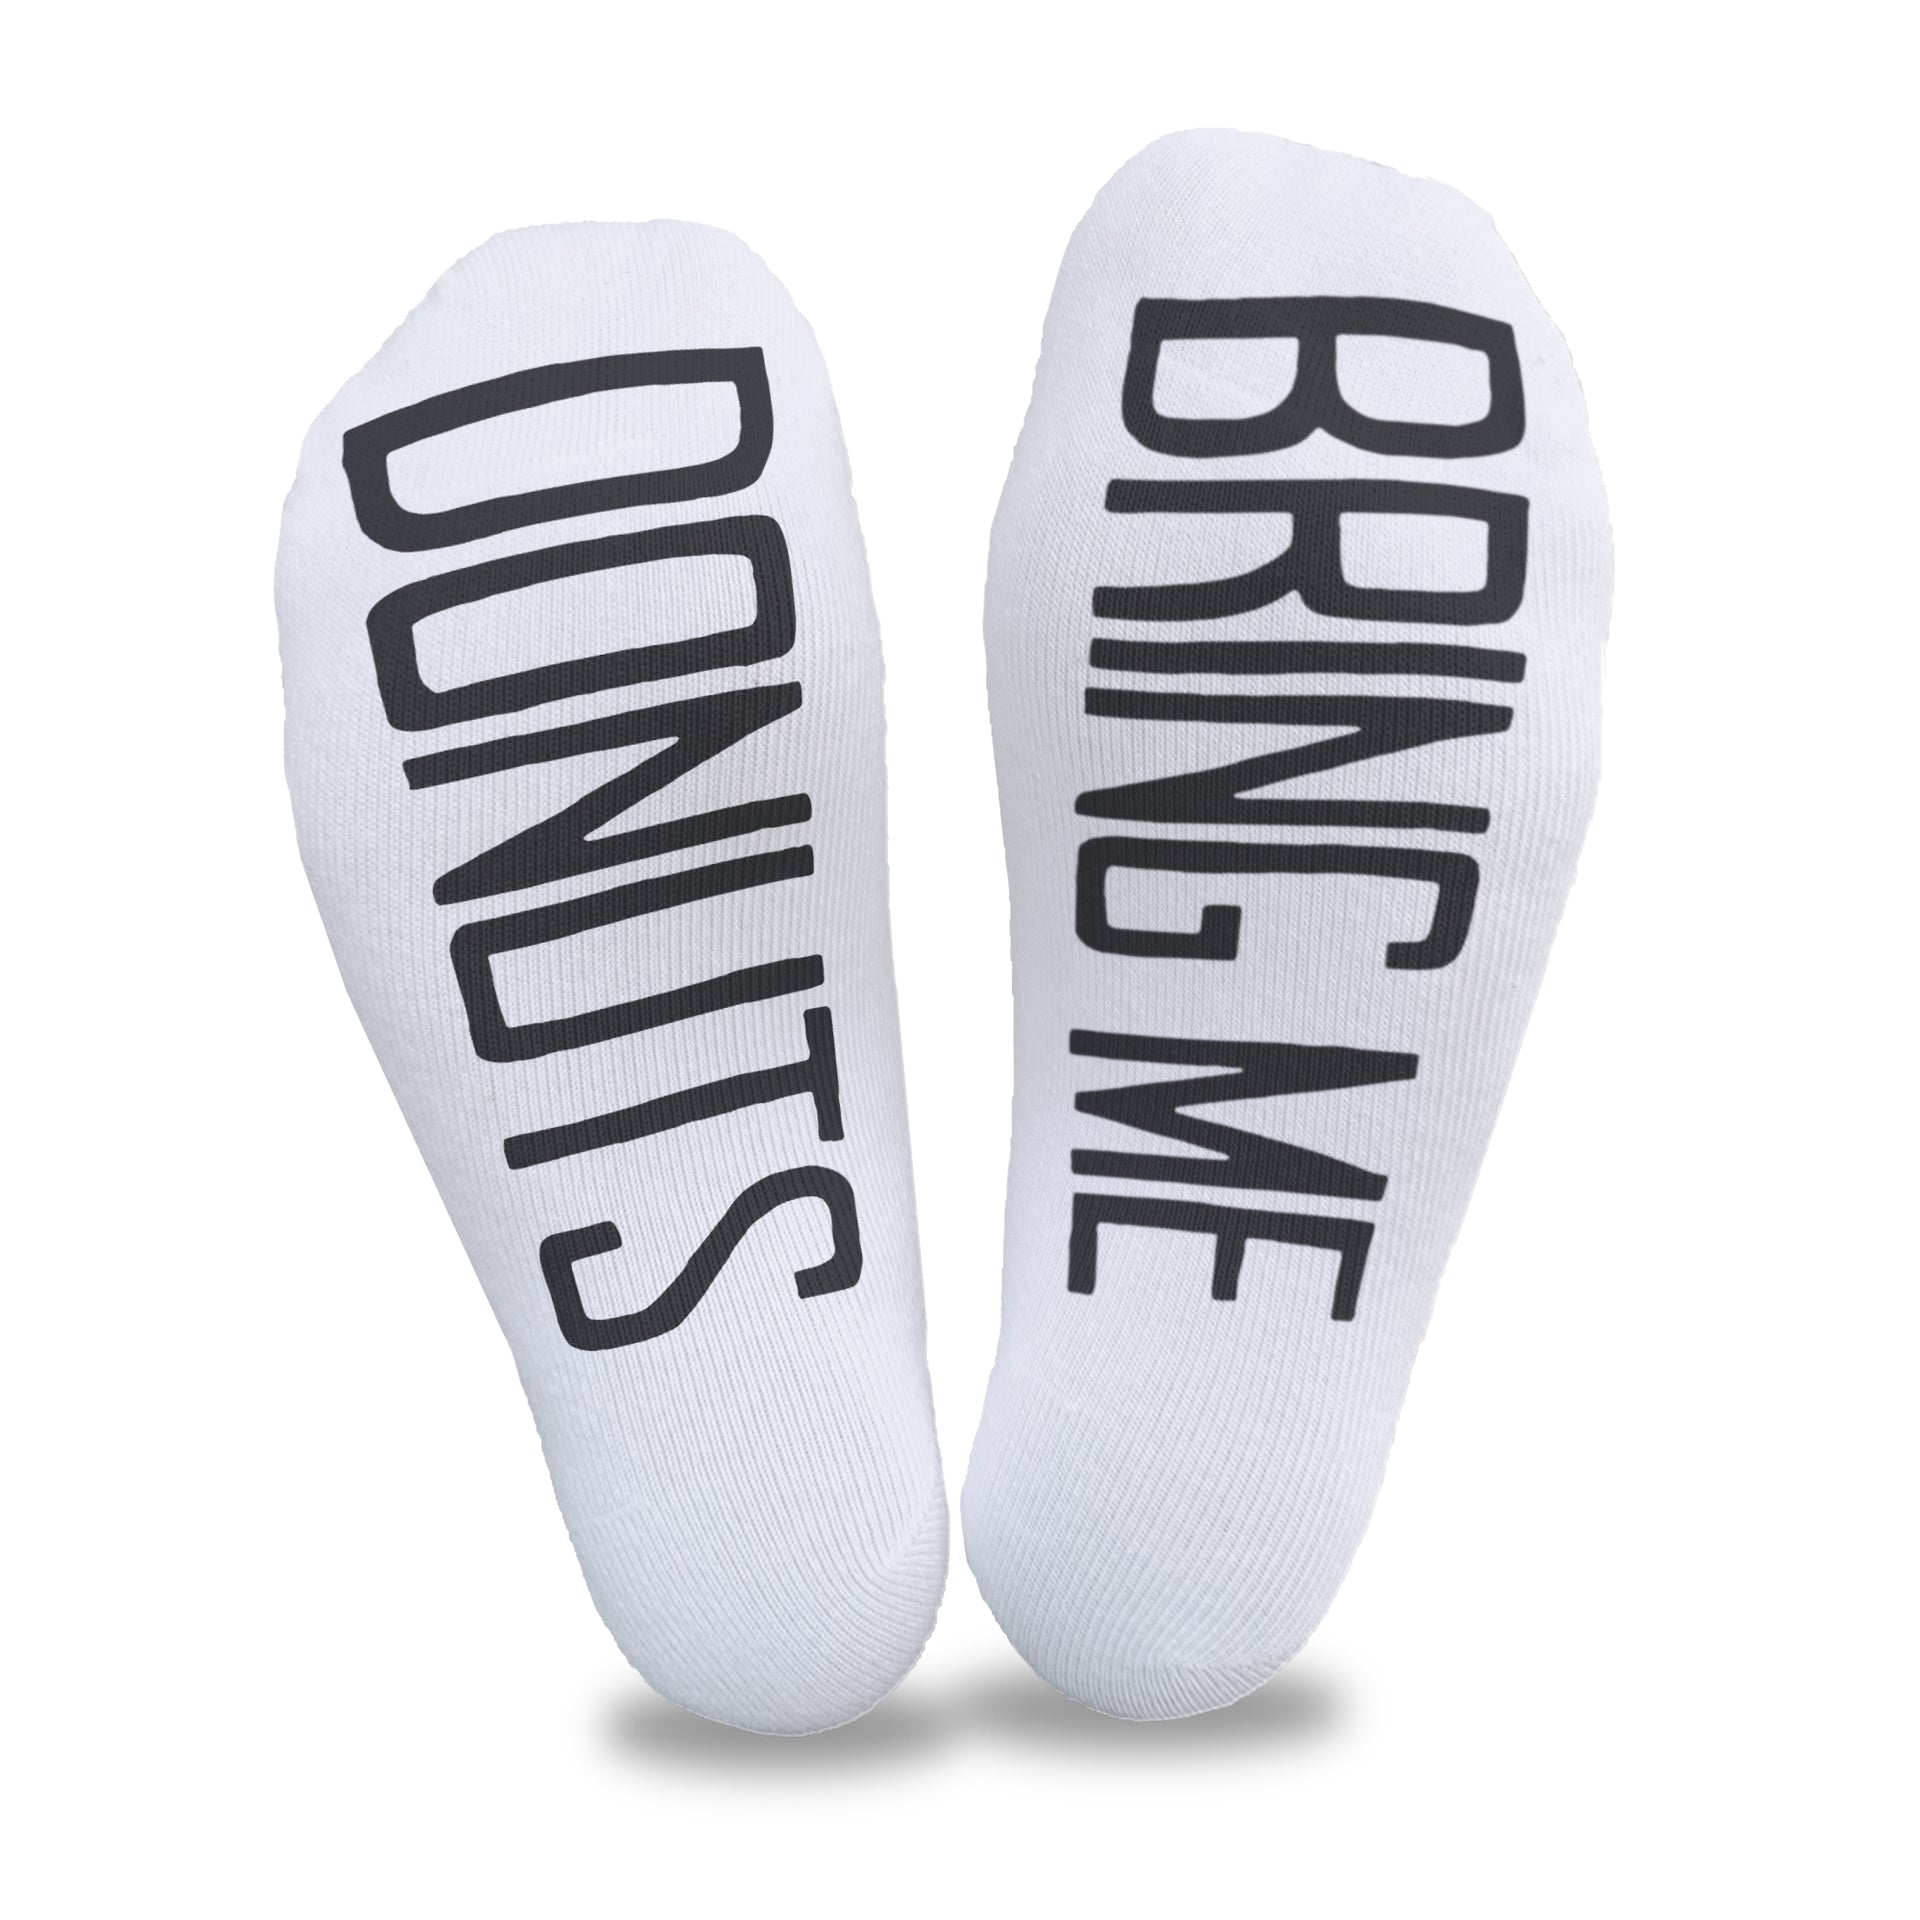 Bring me donuts custom printed on the bottom of white cotton no show footie socks is a fun way to get your husbands attention.